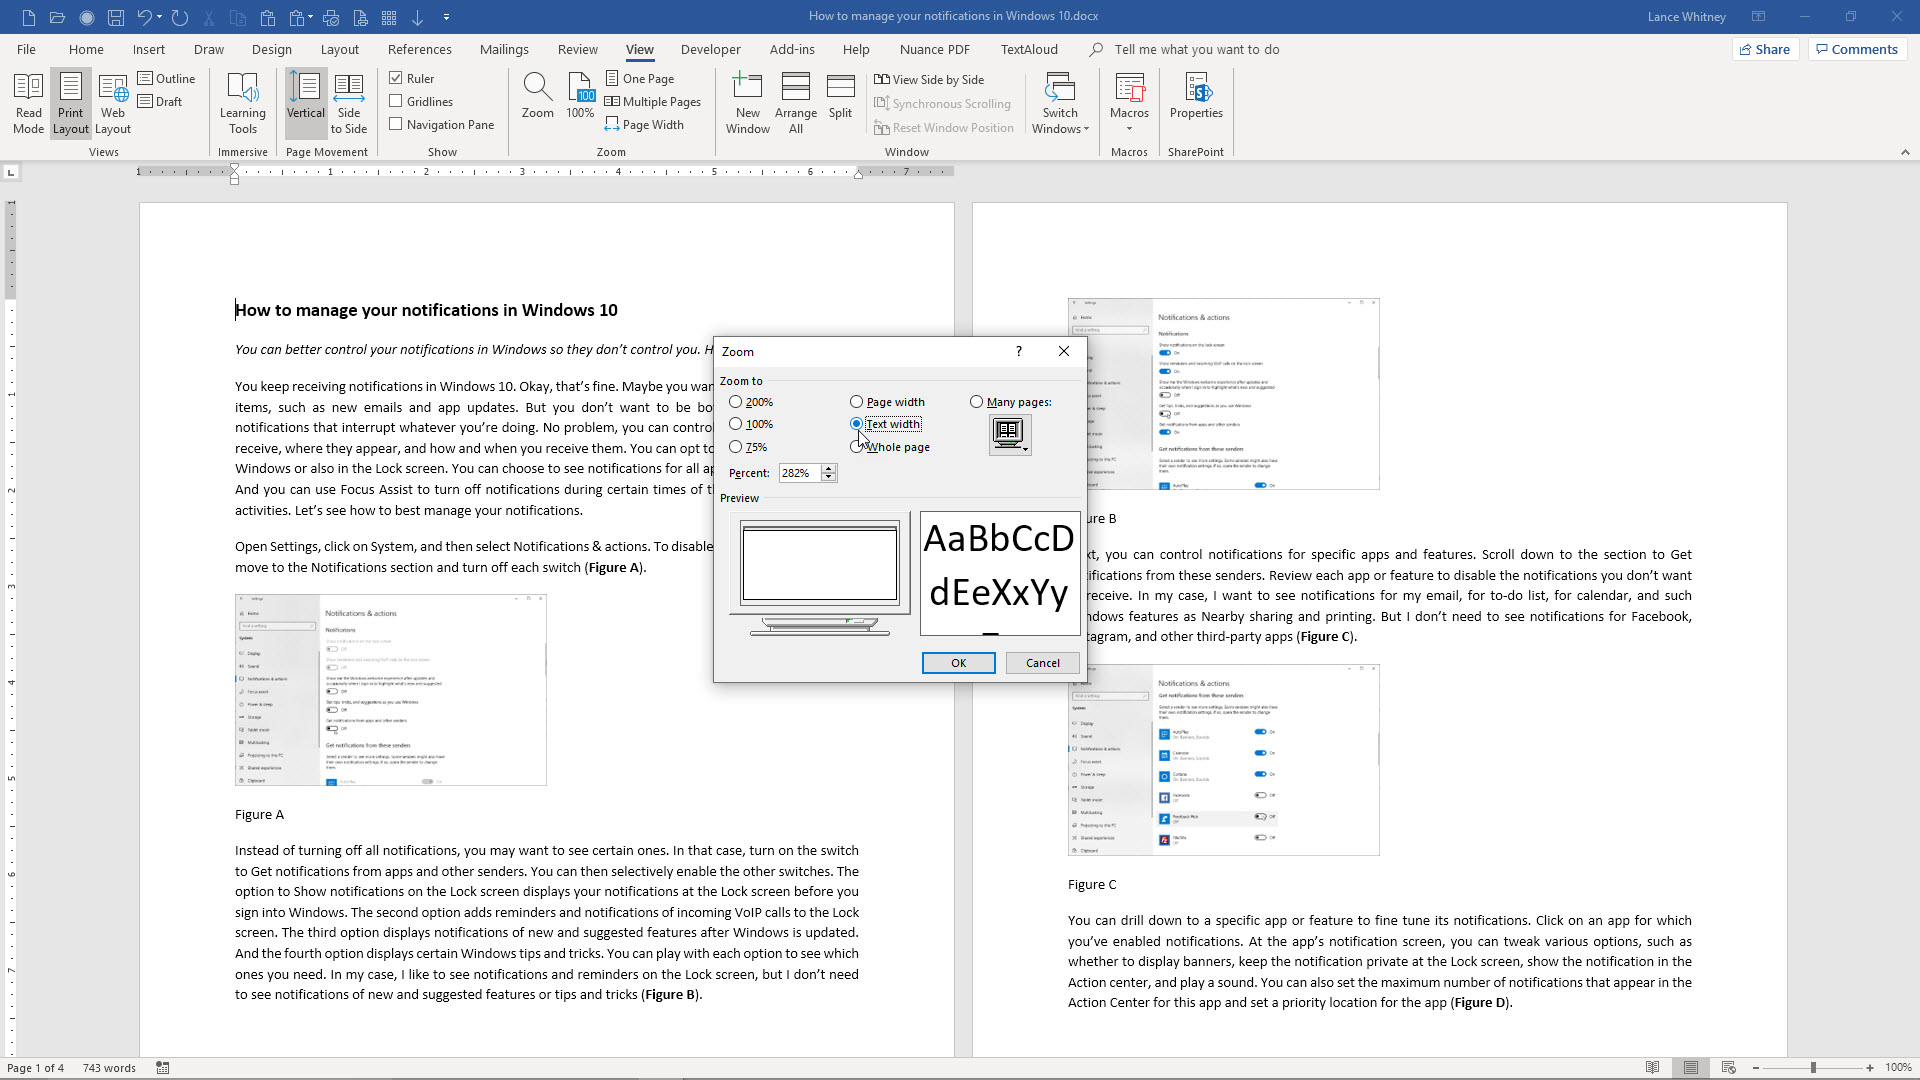 How to work with different views in Microsoft Word - TechRepublic